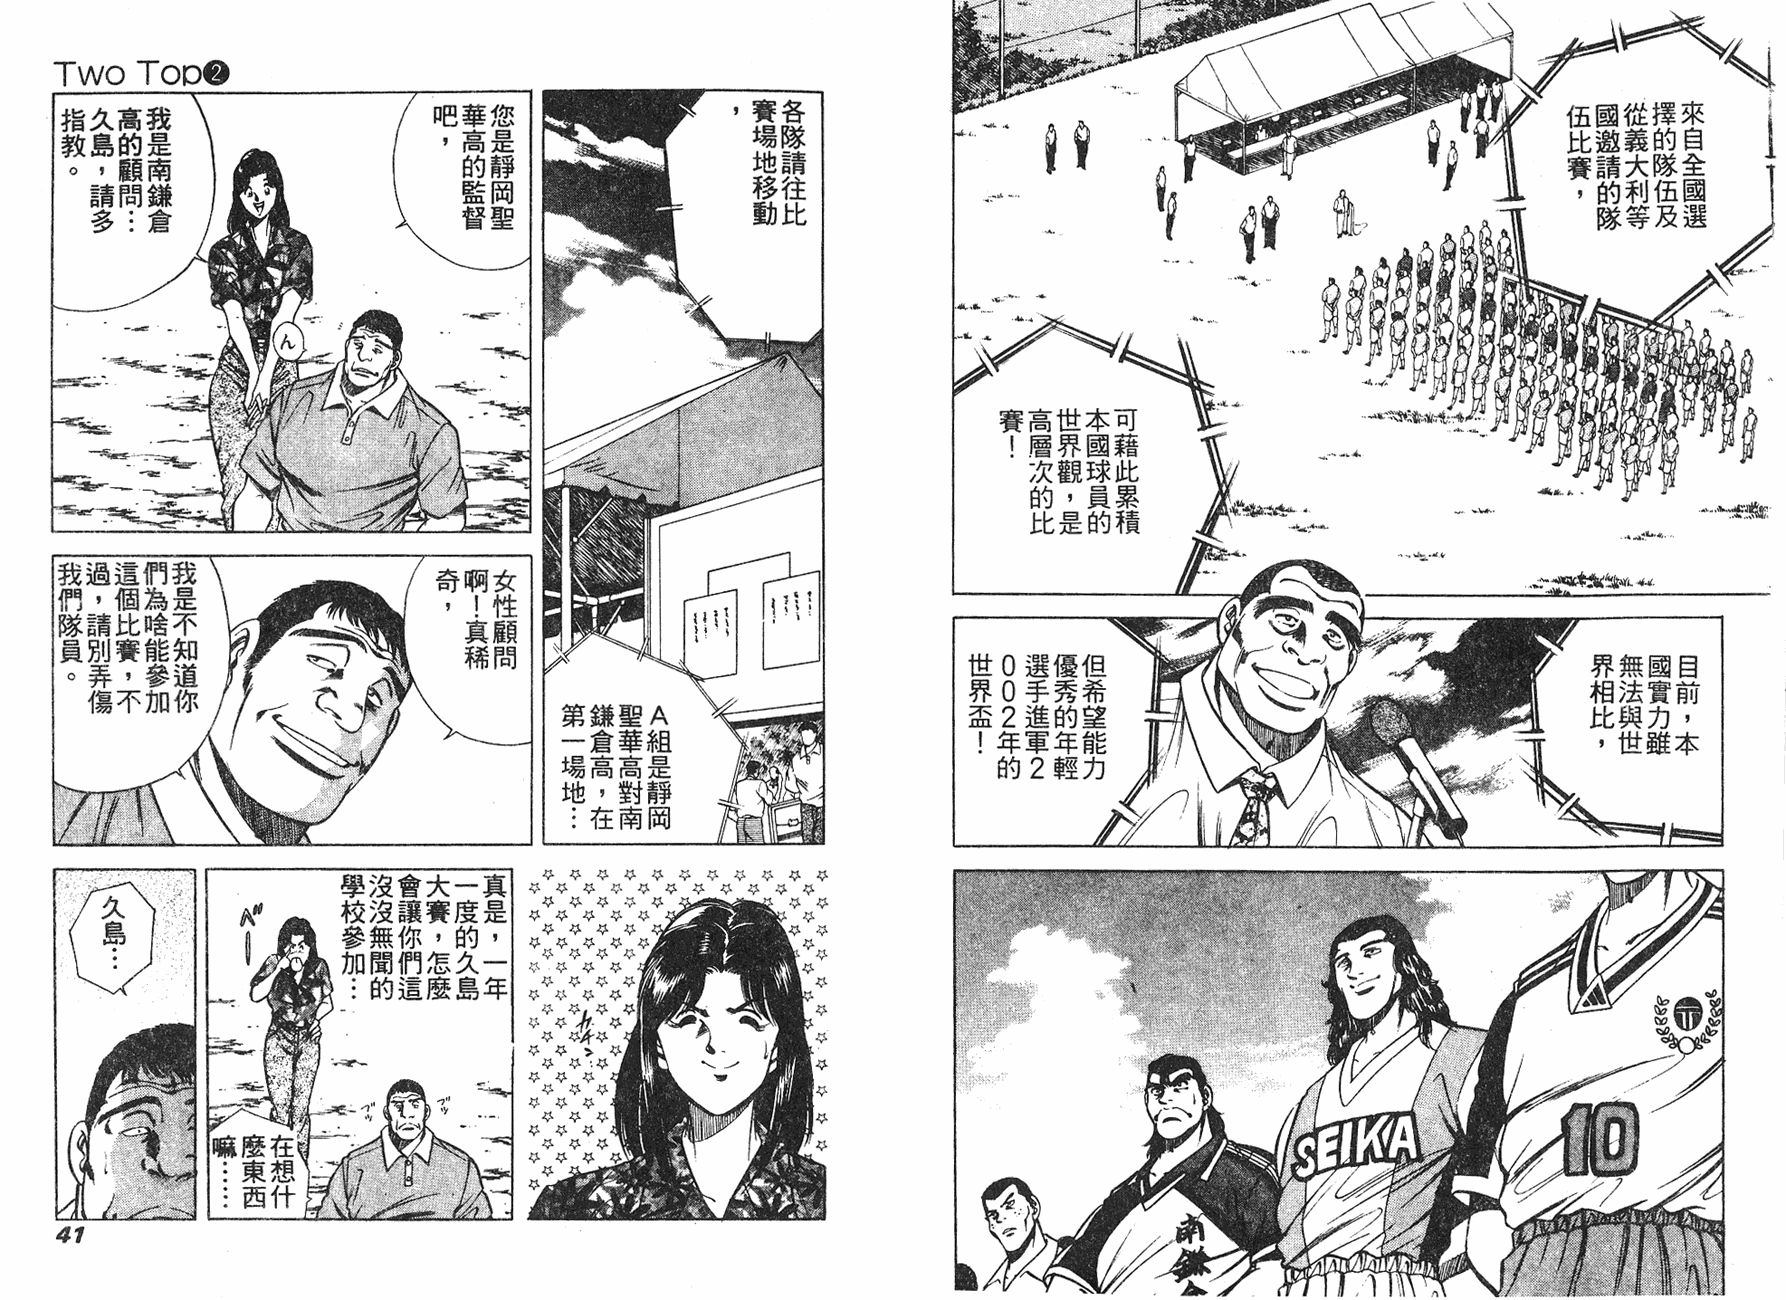 Two Top - 第02卷(1/3) - 6